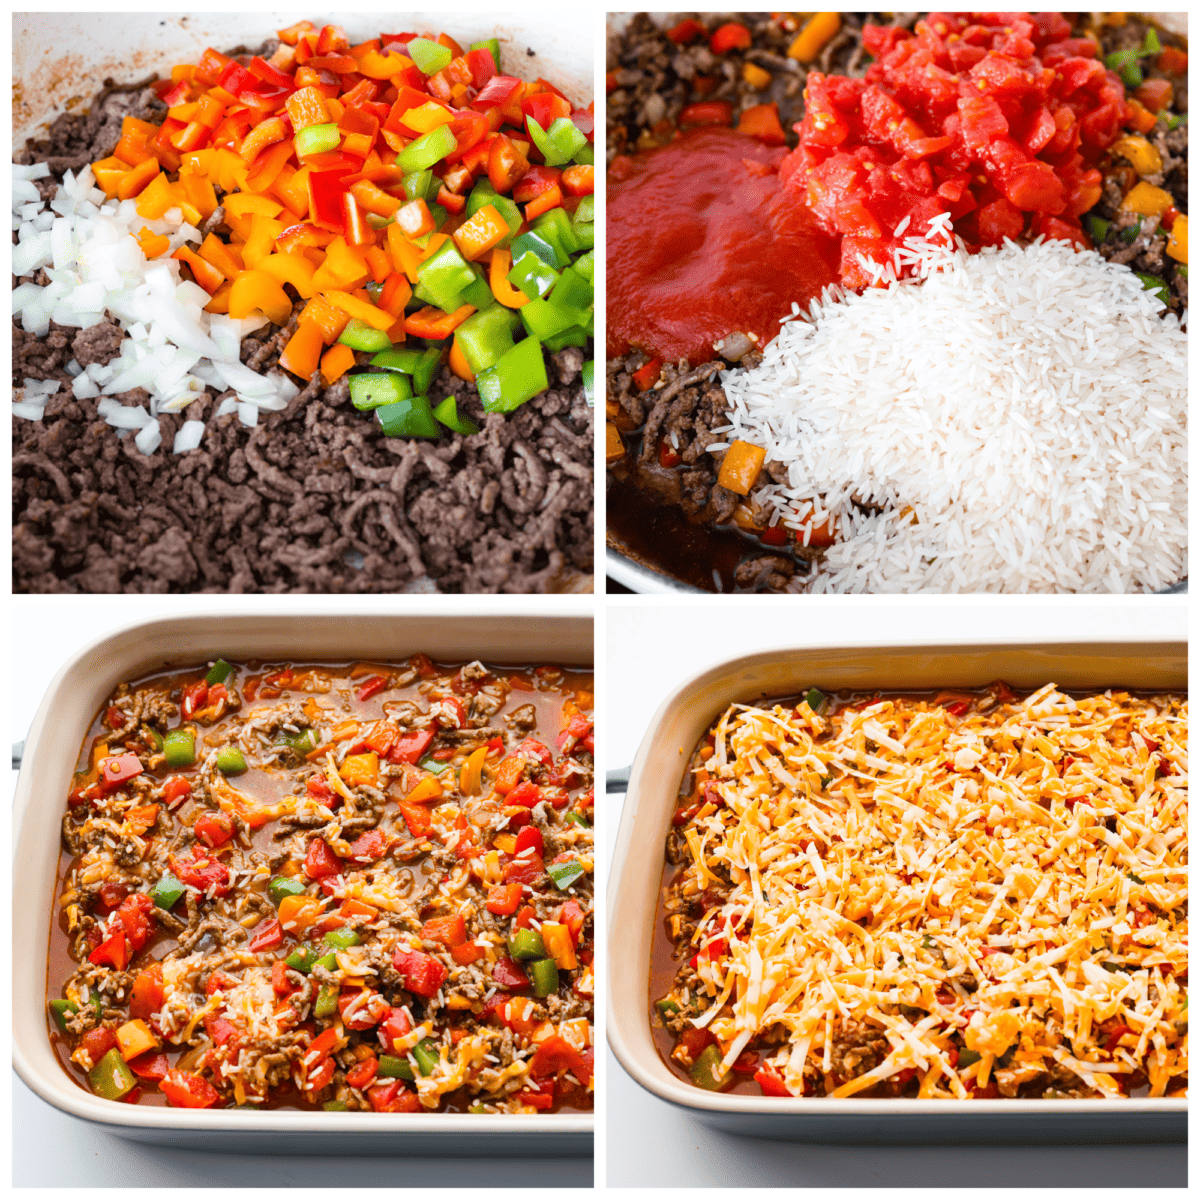 4-photo collage of ground beef, vegetables, rice, and cheese being layered in a casserole dish.